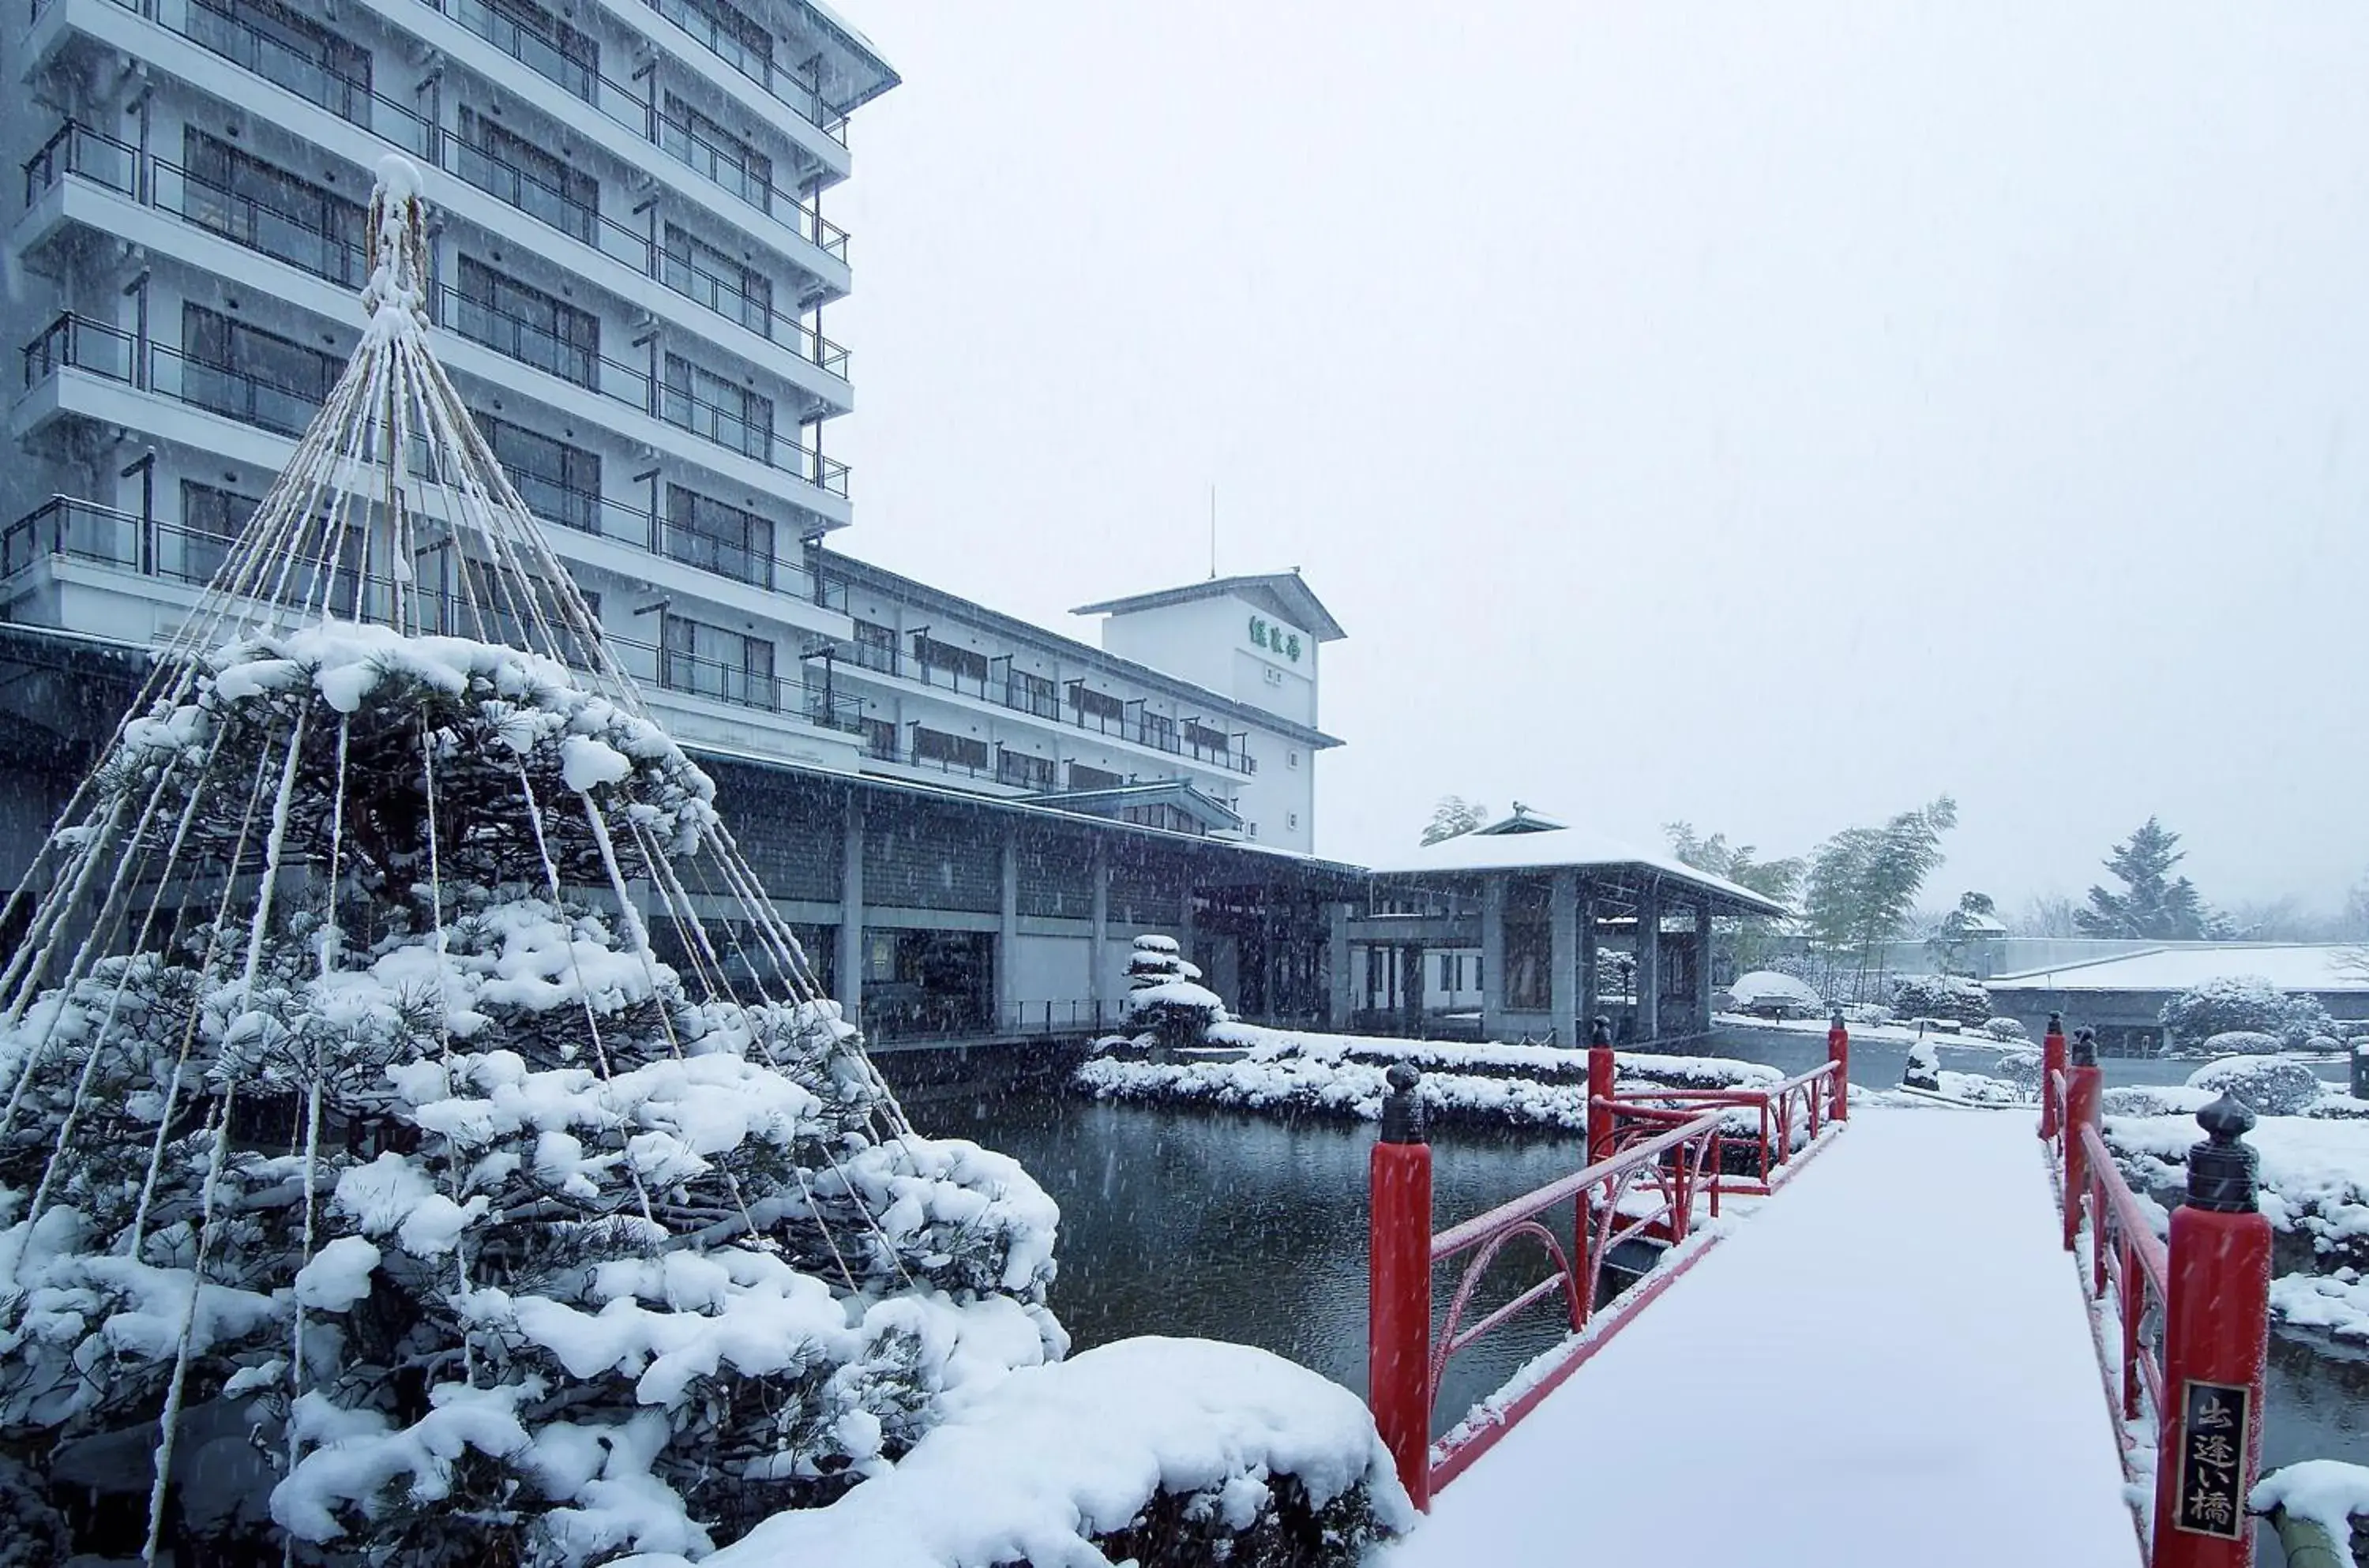 Day, Winter in Ryokusuitei